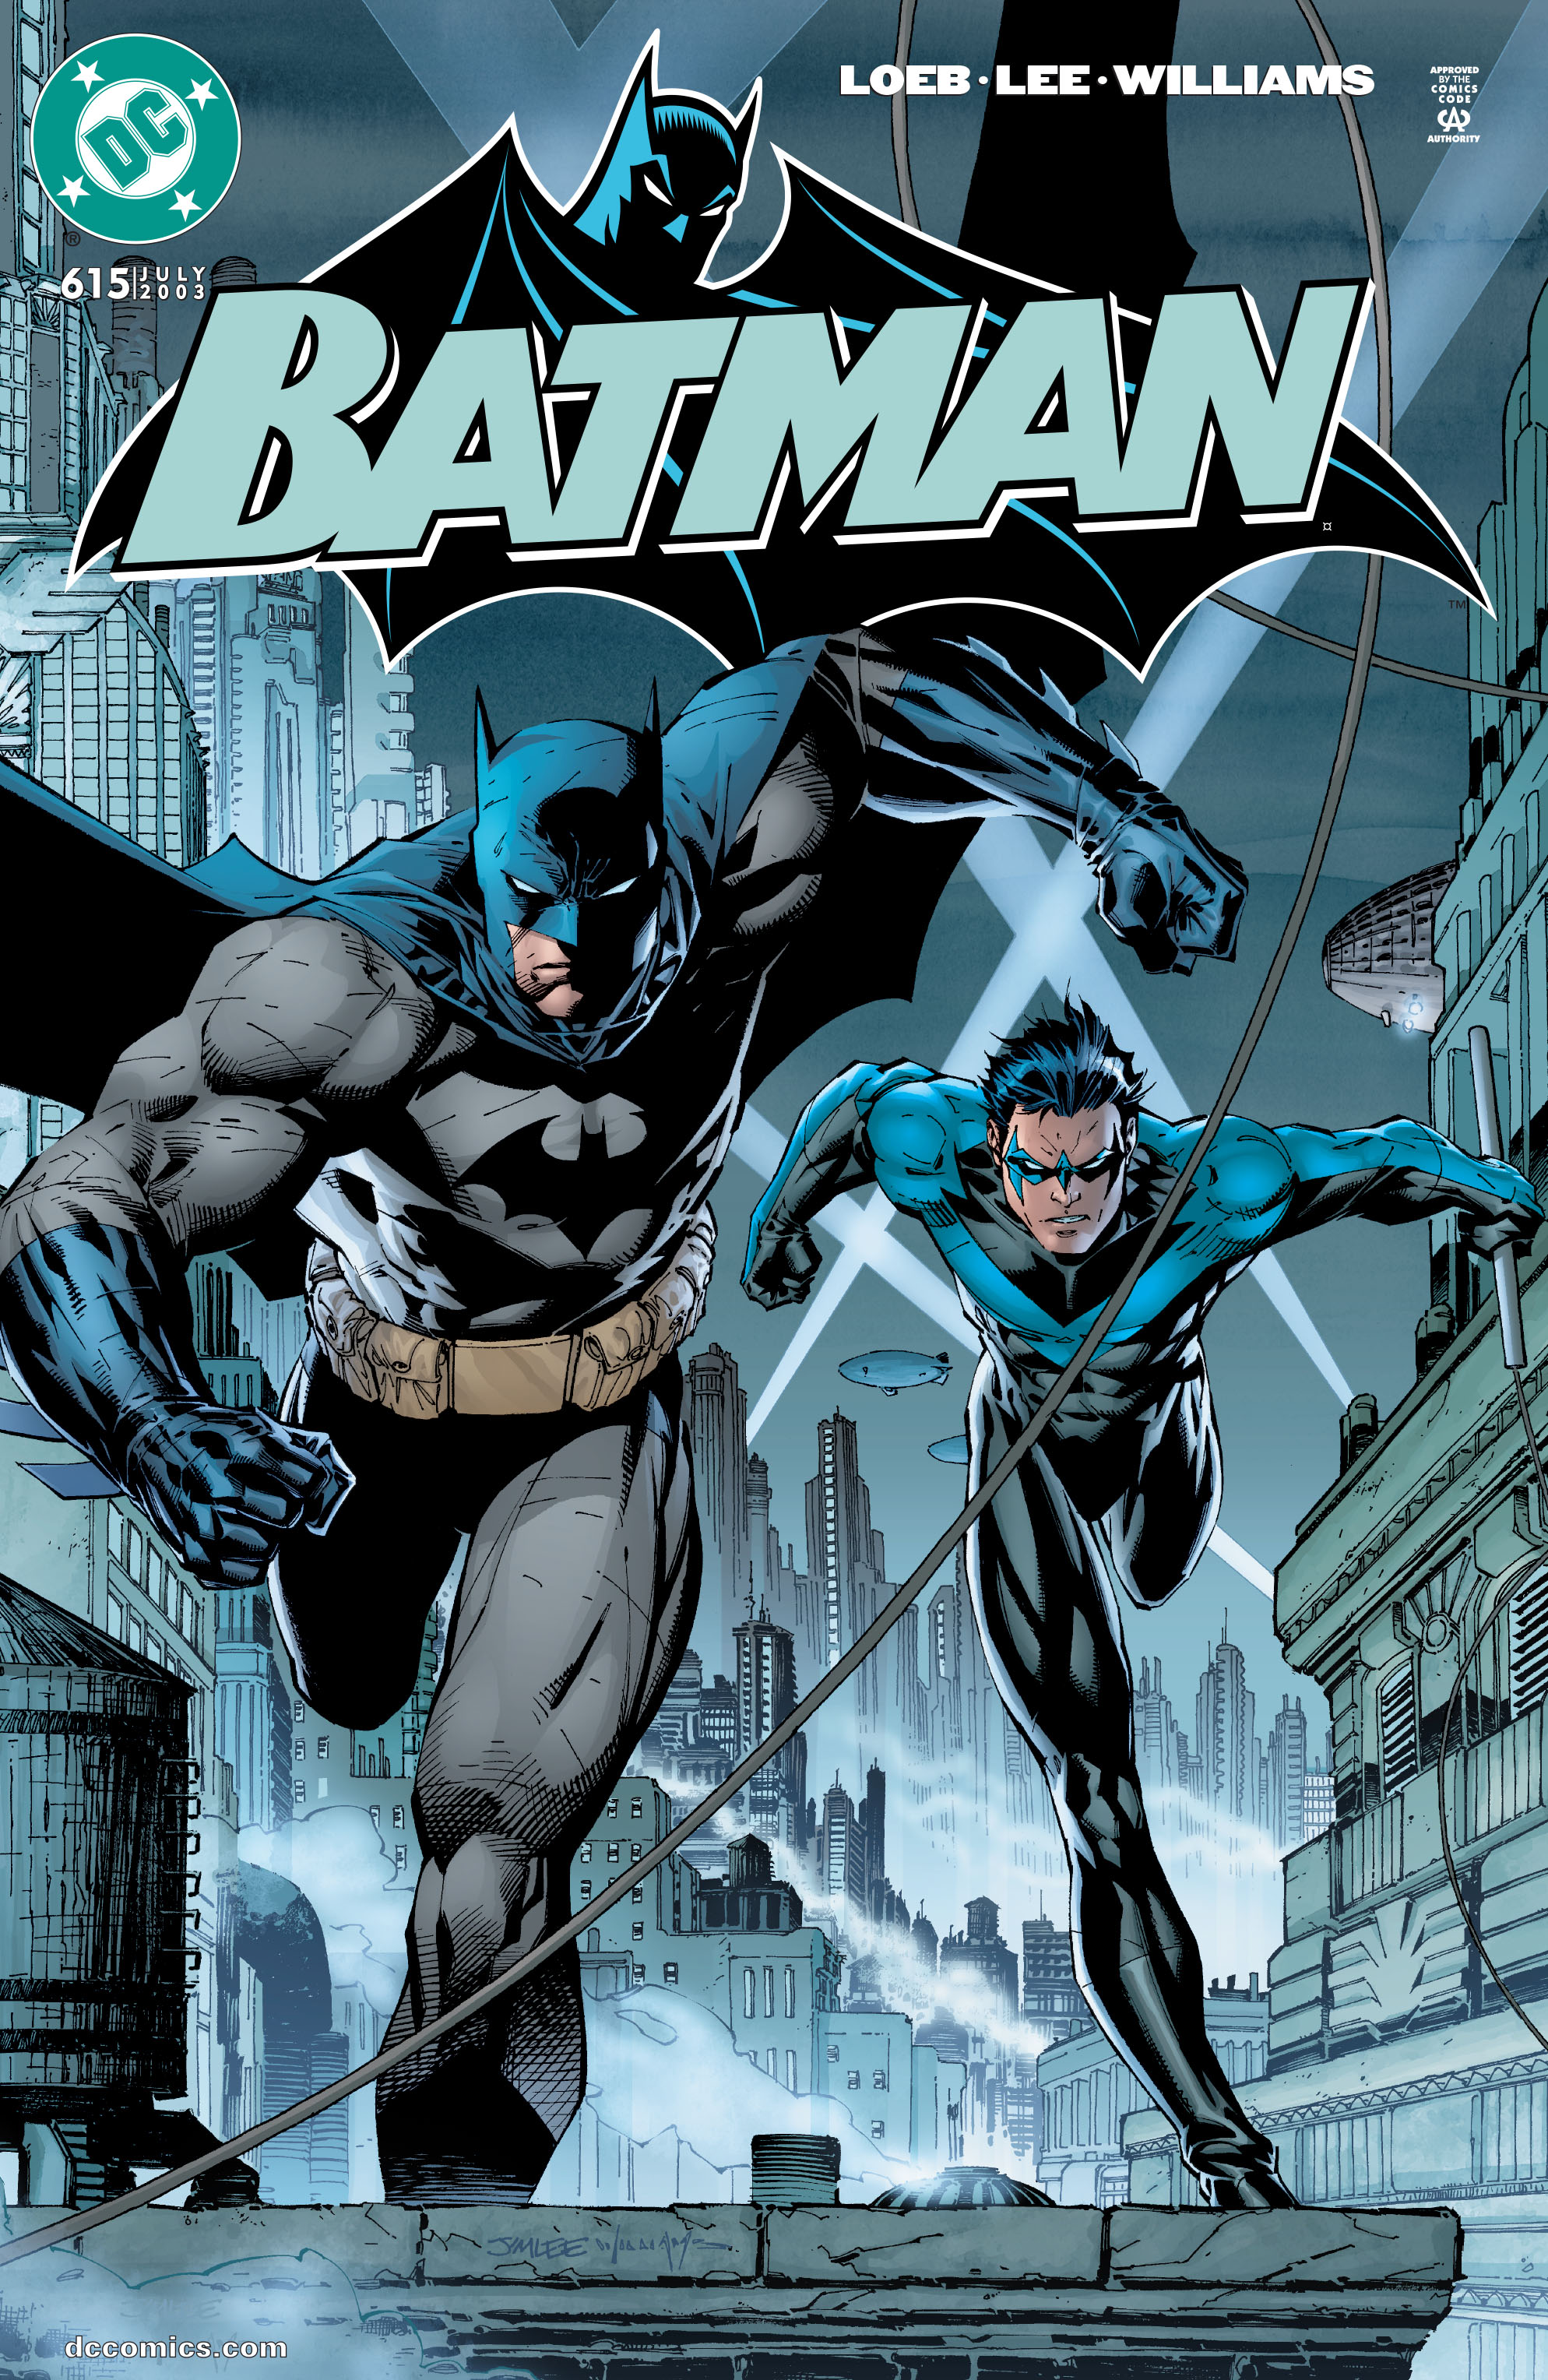 Batman 1940 Issue 615 | Read Batman 1940 Issue 615 comic online in high  quality. Read Full Comic online for free - Read comics online in high  quality .| READ COMIC ONLINE